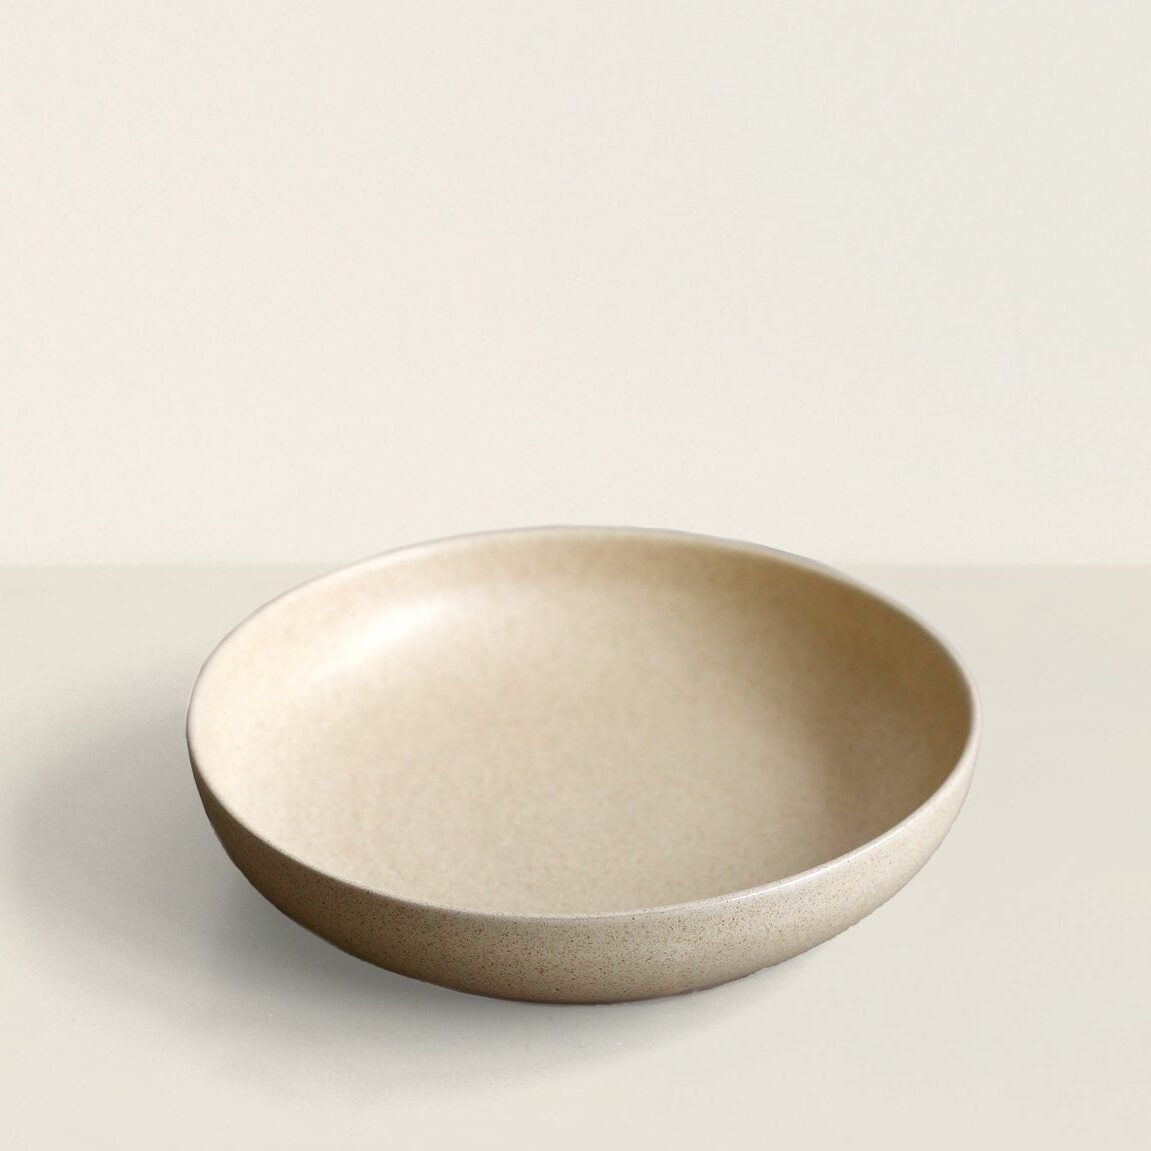 Eating on the Couch Just Got More Stylish Thanks to This Kind of Bowl